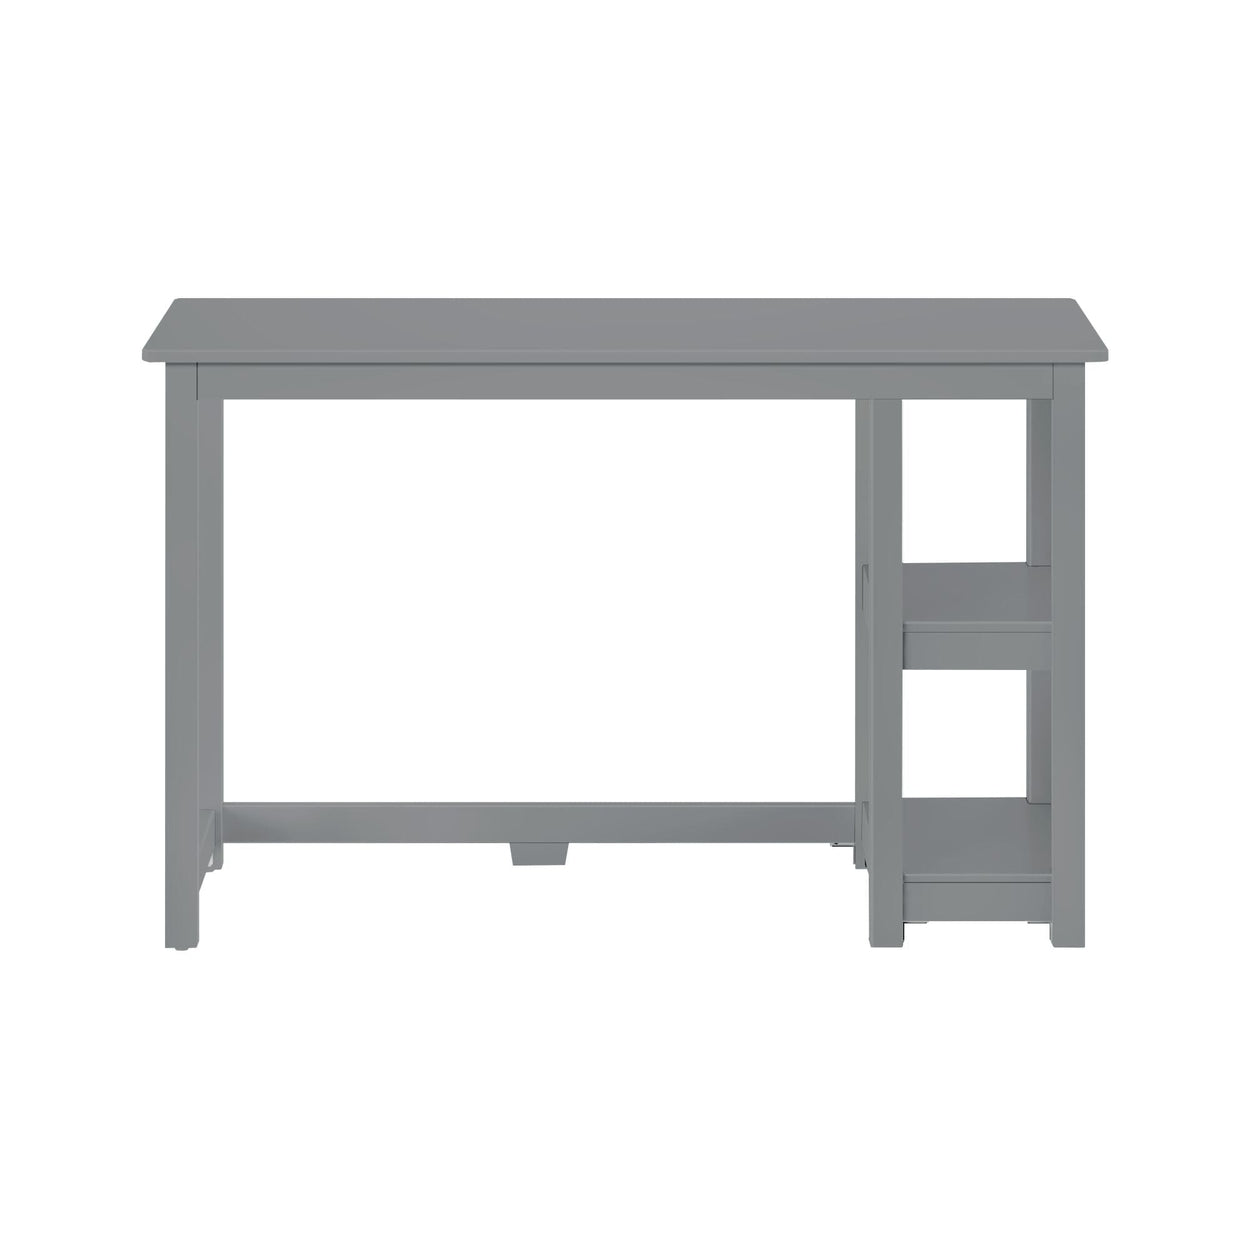 181205-121 : Furniture Desk with Bookshelves - 47 inches, Grey